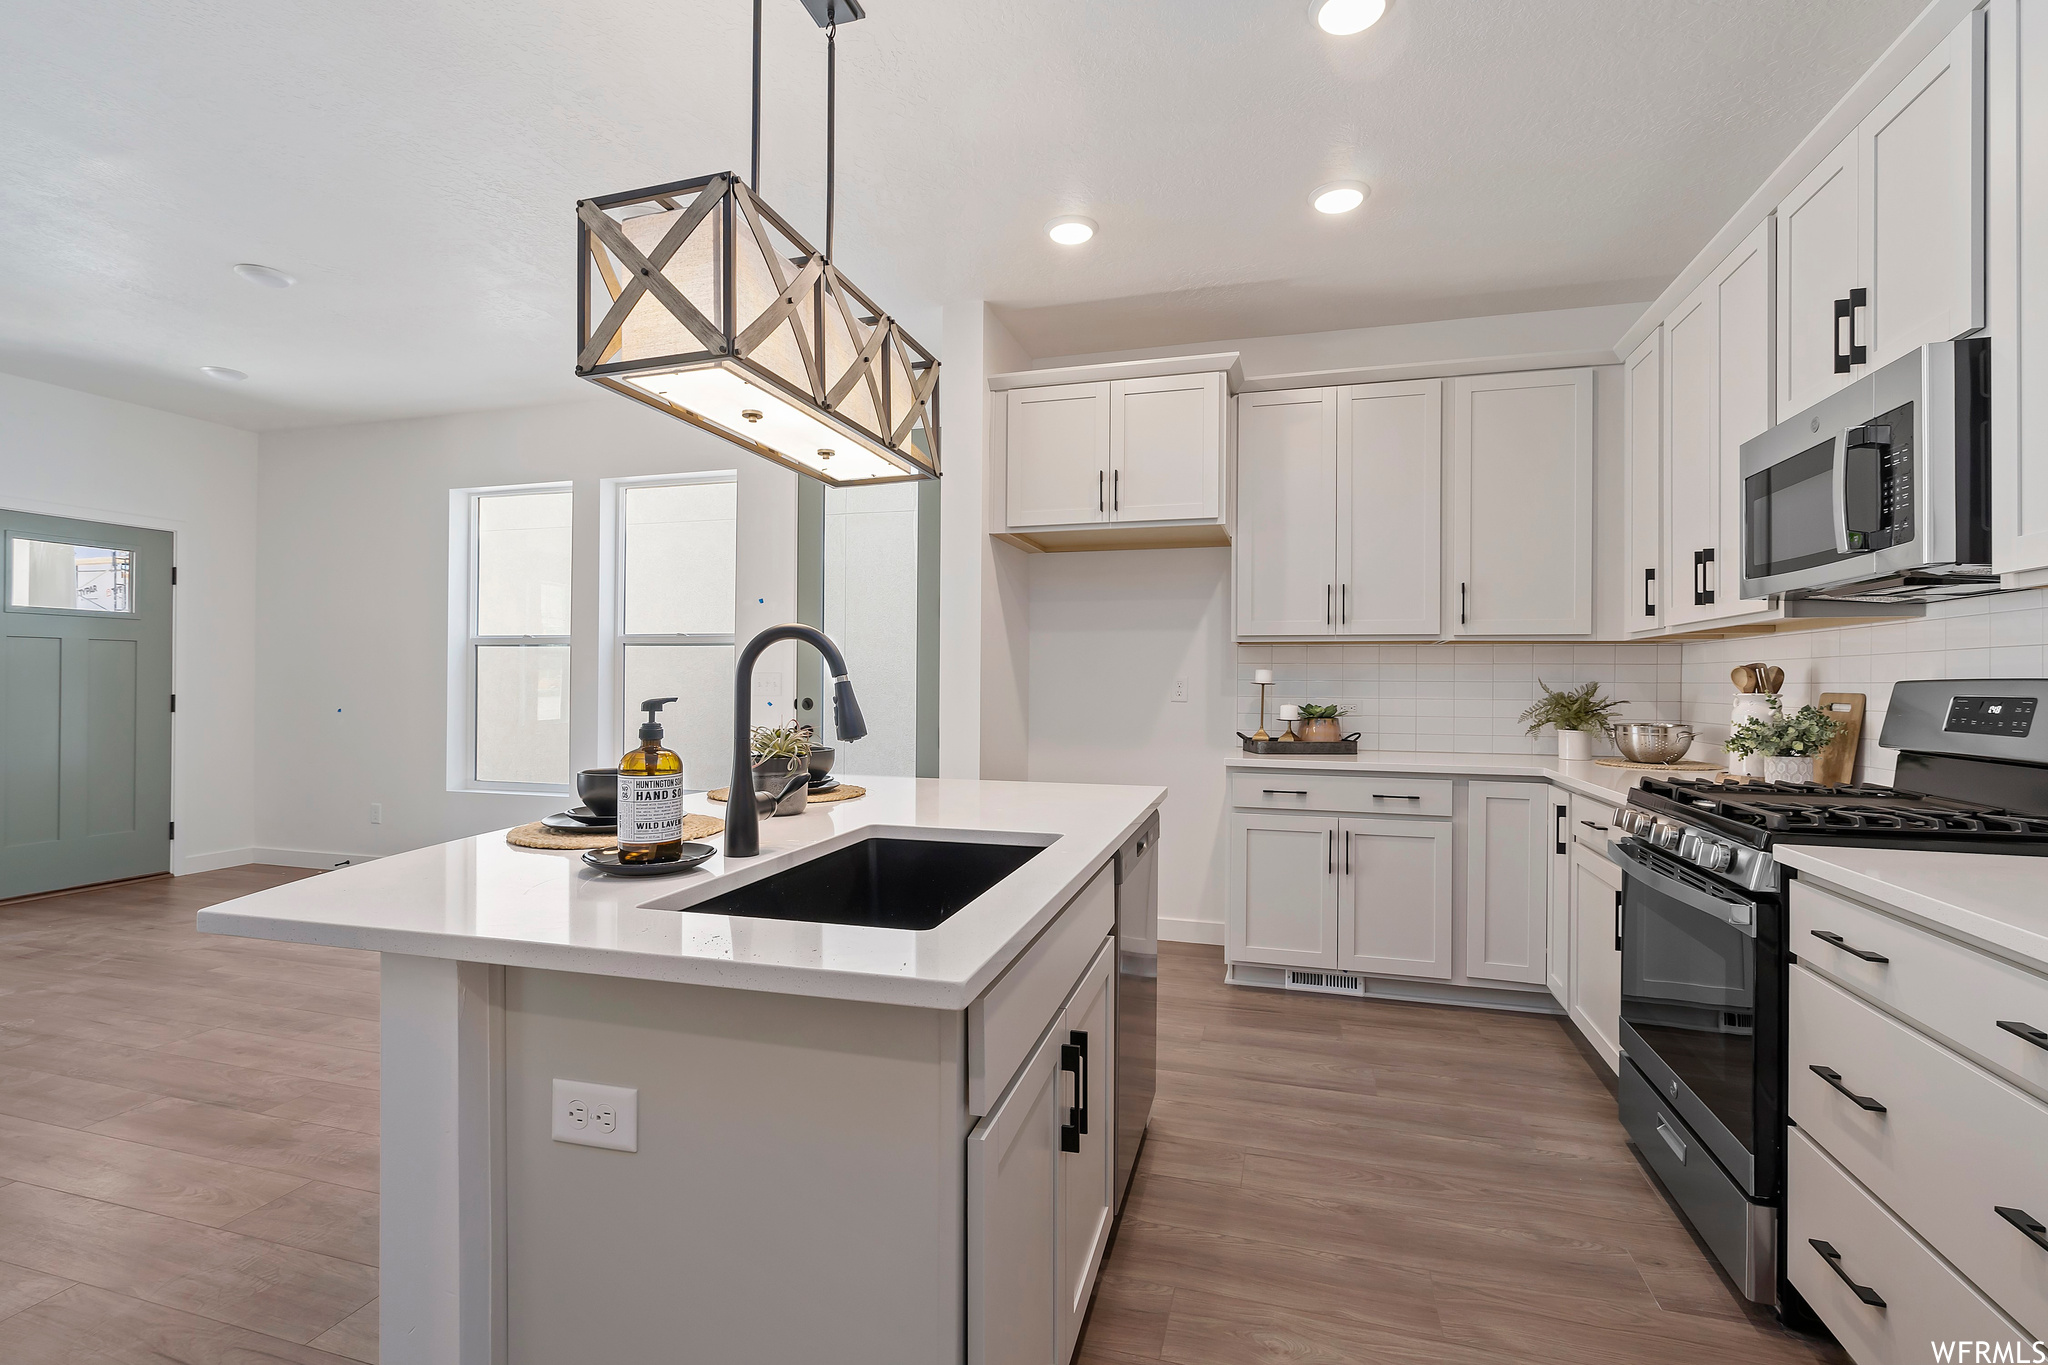 Kitchen with appliances with stainless steel finishes, light hardwood / wood-style flooring, and white cabinetry